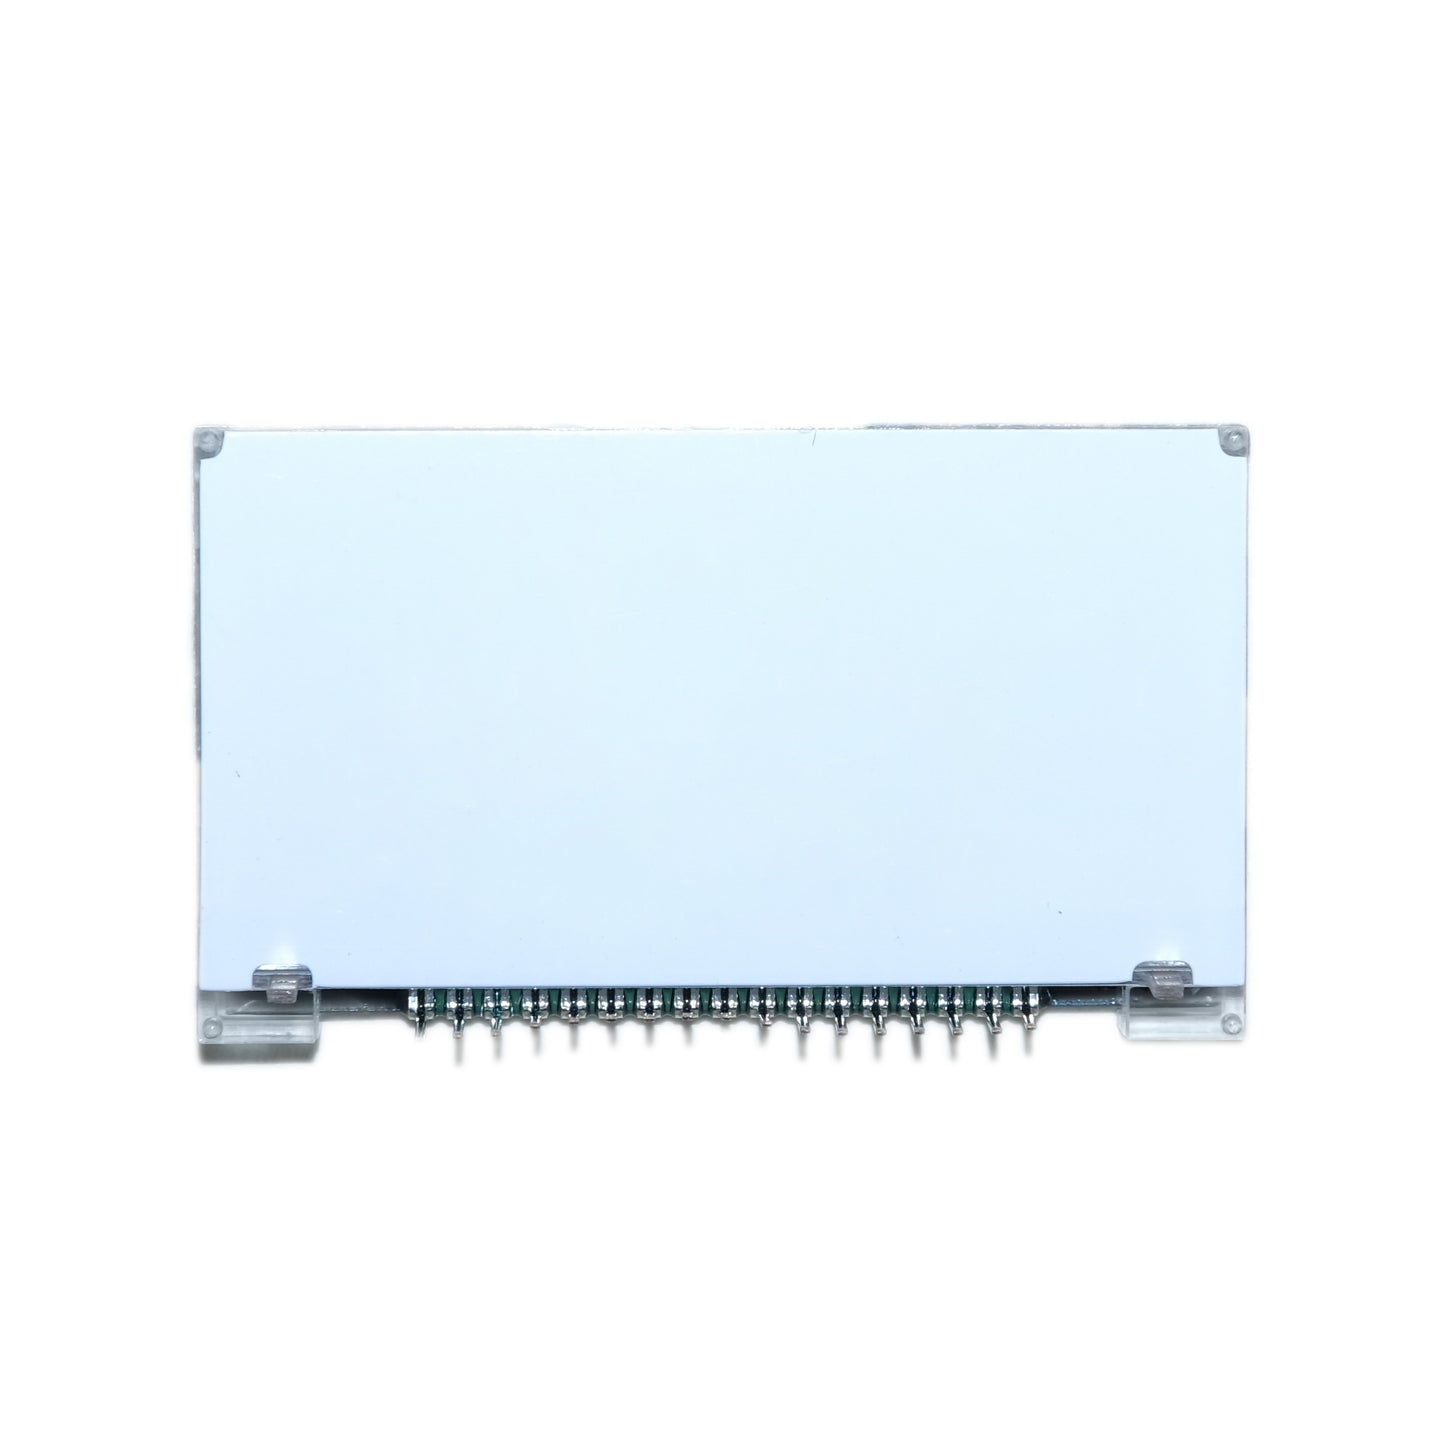 Back of 128x32 pixels COG (Chip-On-Glass) LCD Graphic Display Module